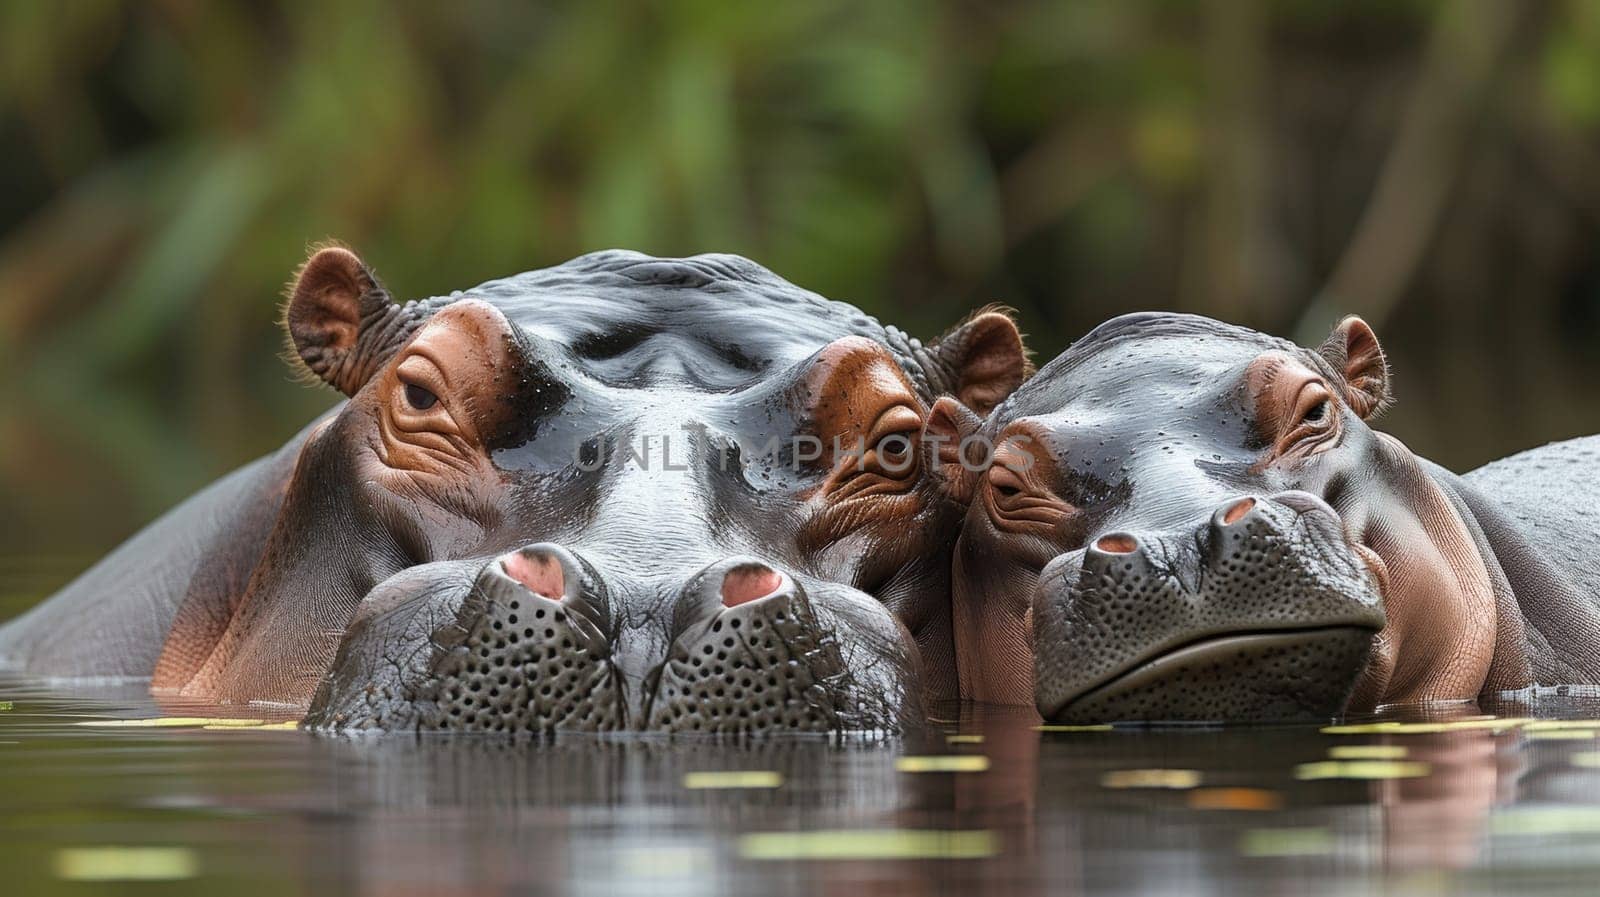 Two hippos are swimming in the water together with their heads touching